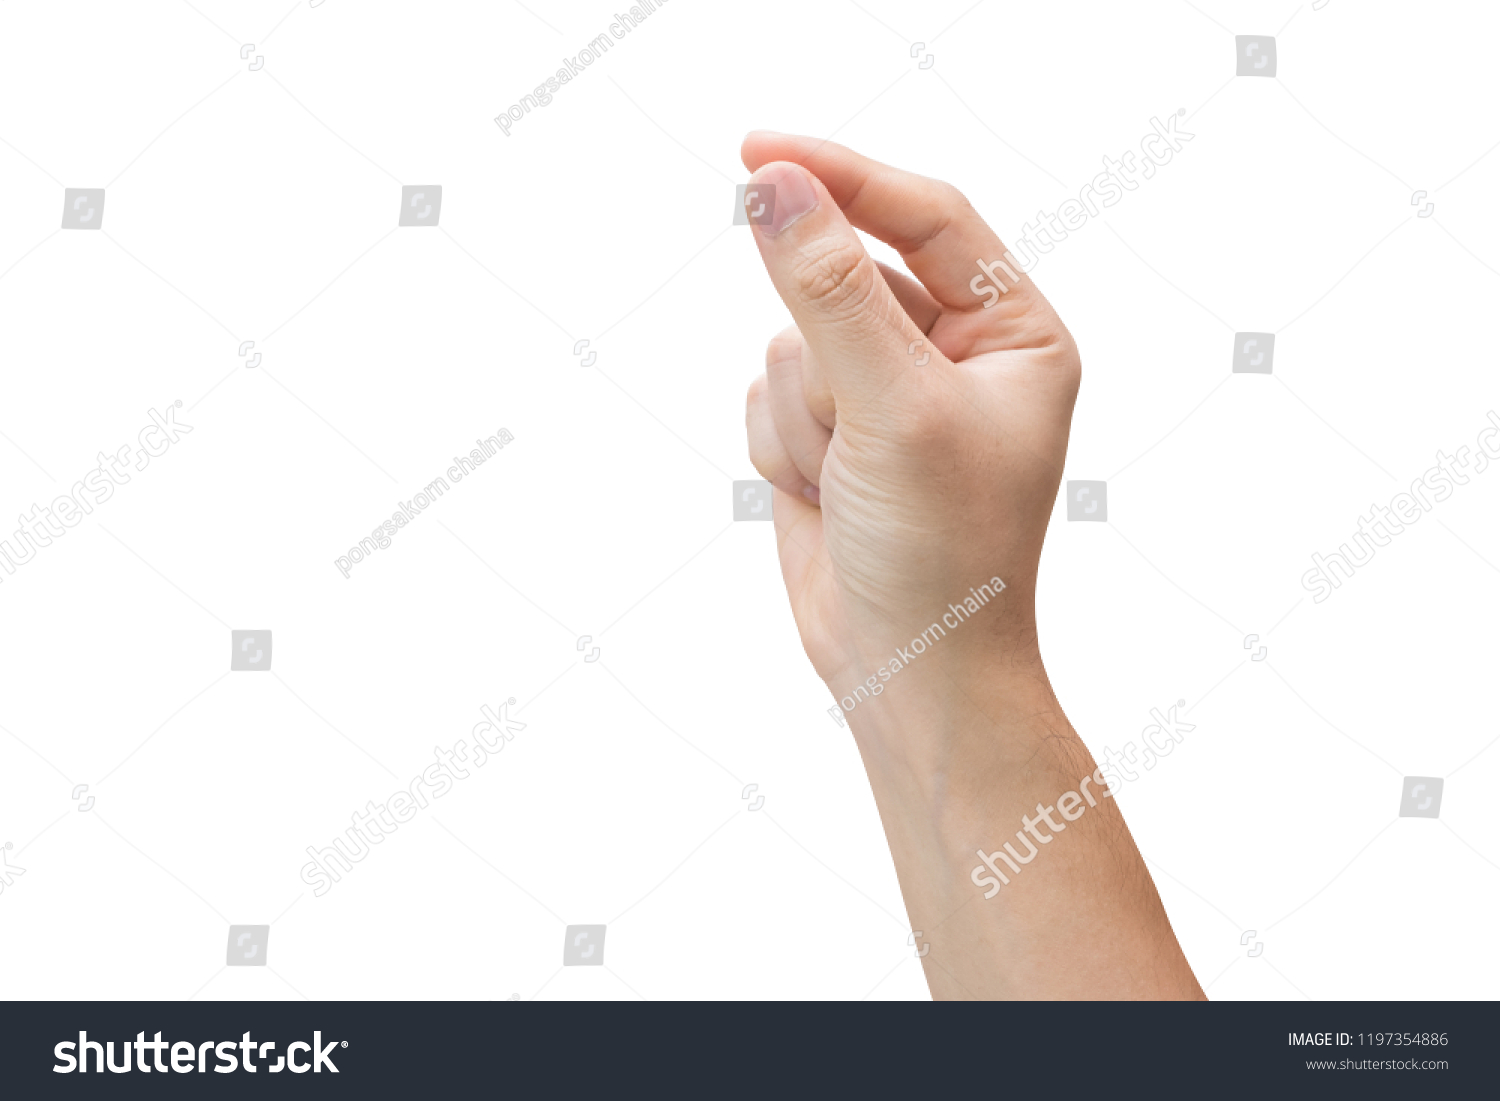 Man hand holding, isolated on white background with clipping path. #1197354886